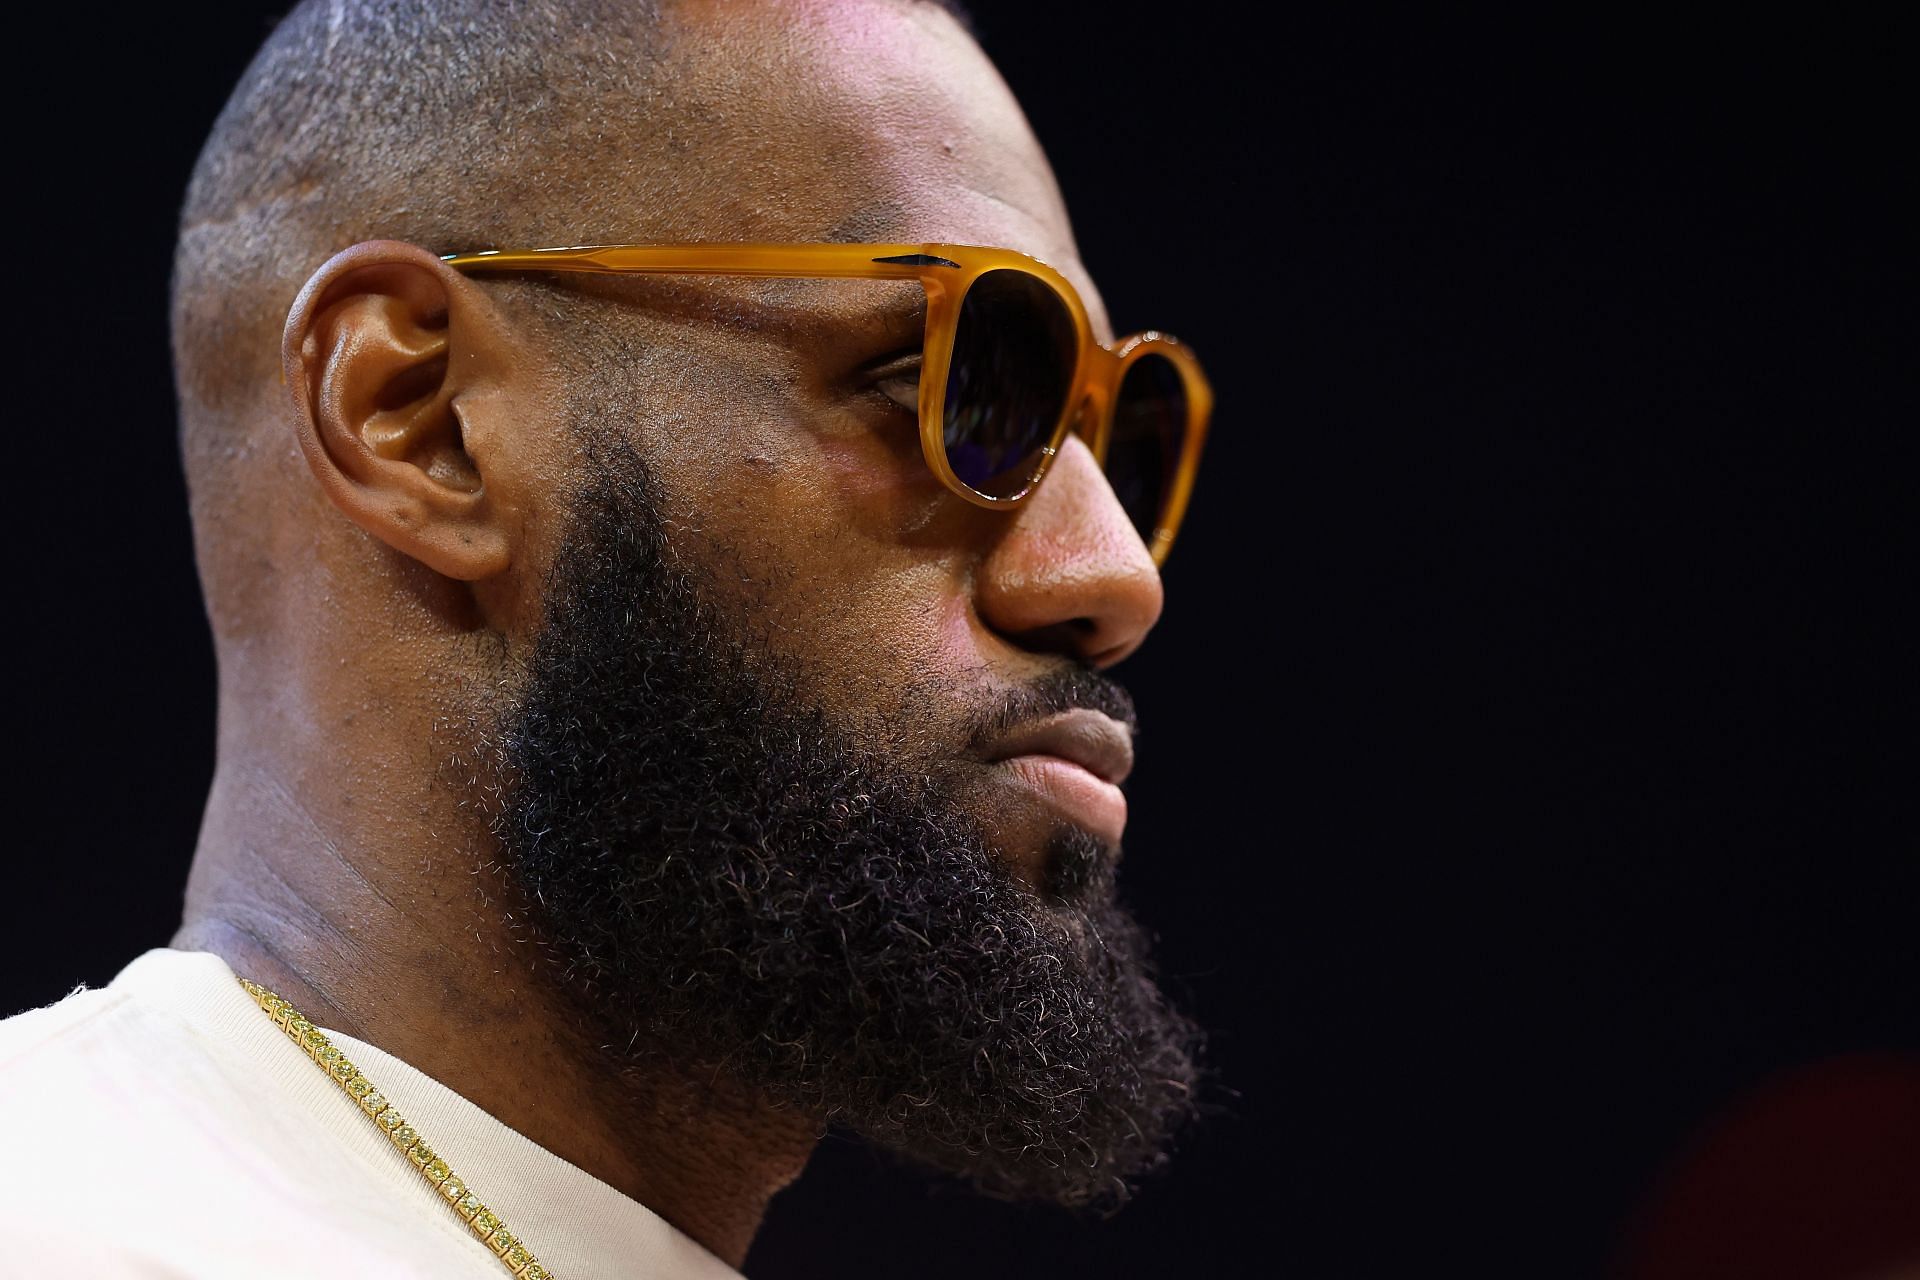 LeBron James is the highest paid basketball player in the world